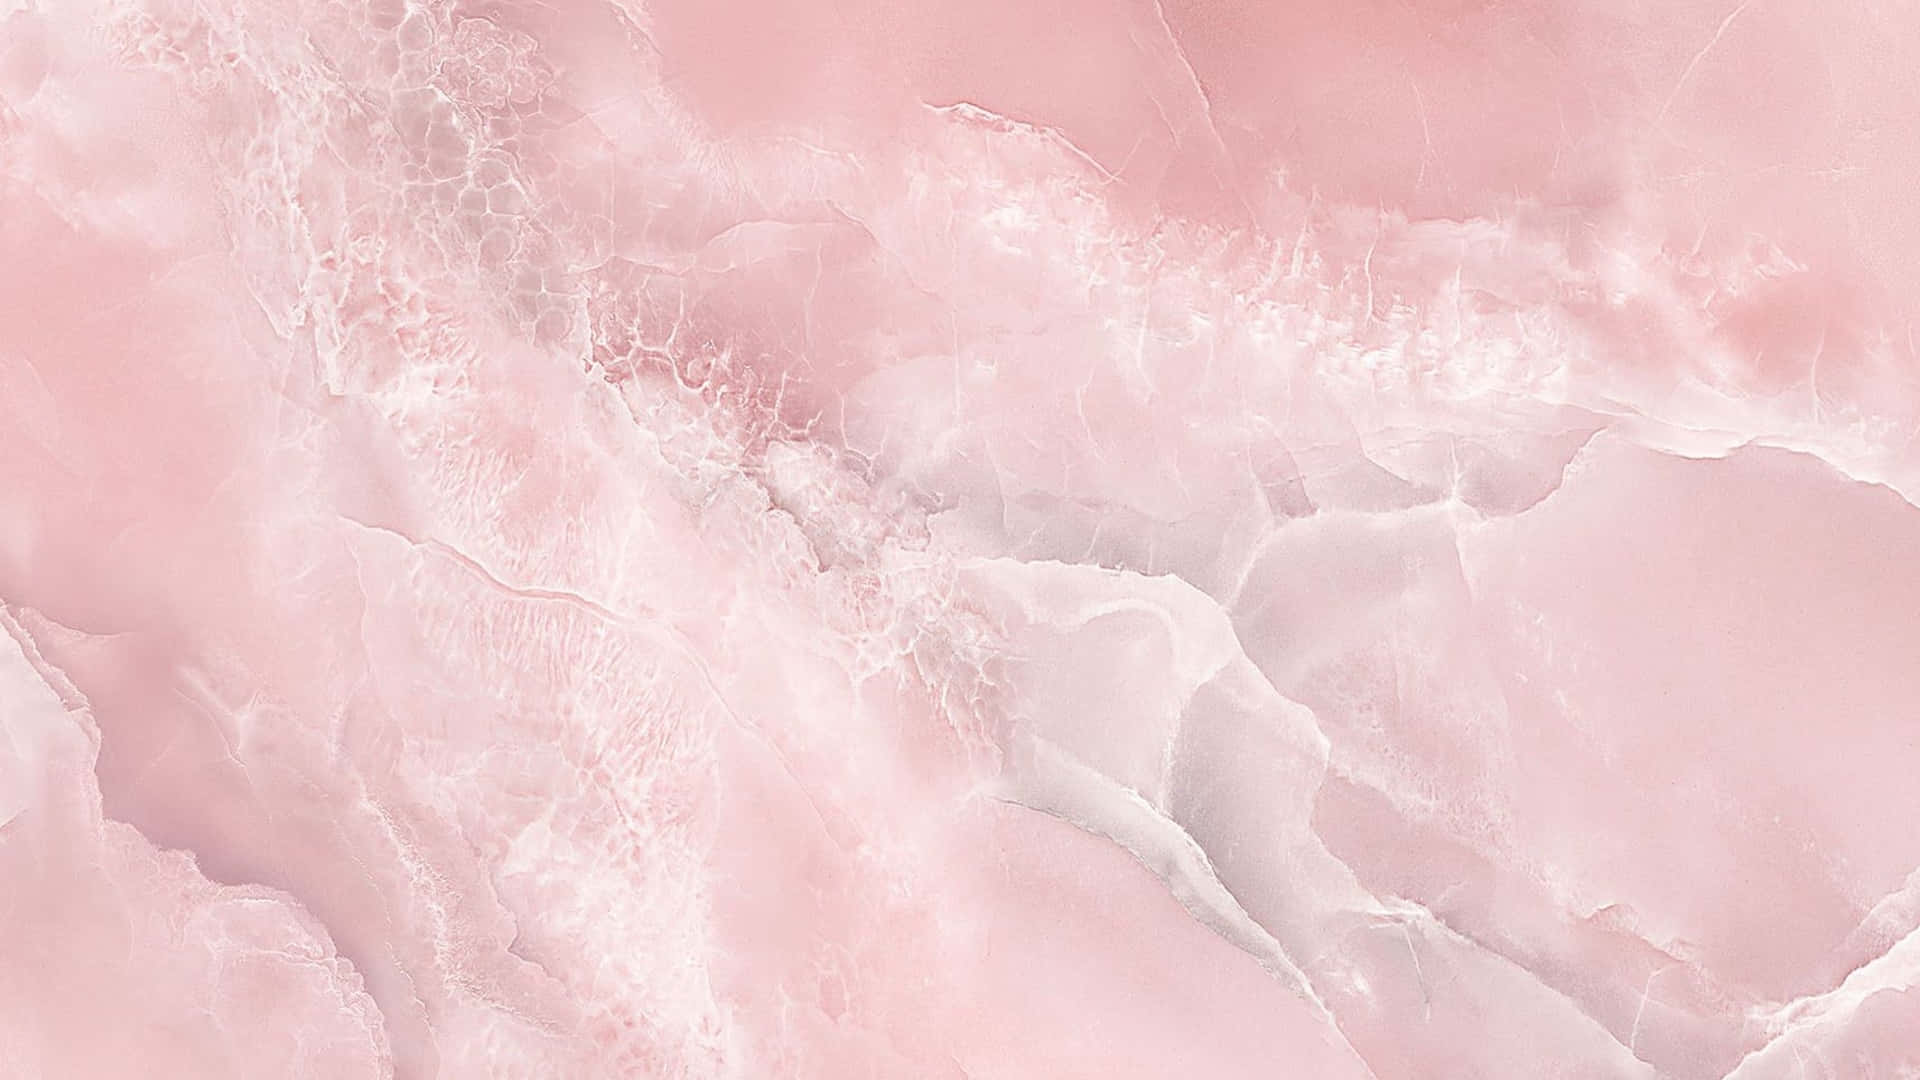 A Pink Marble Wallpaper With White And Pink Marble